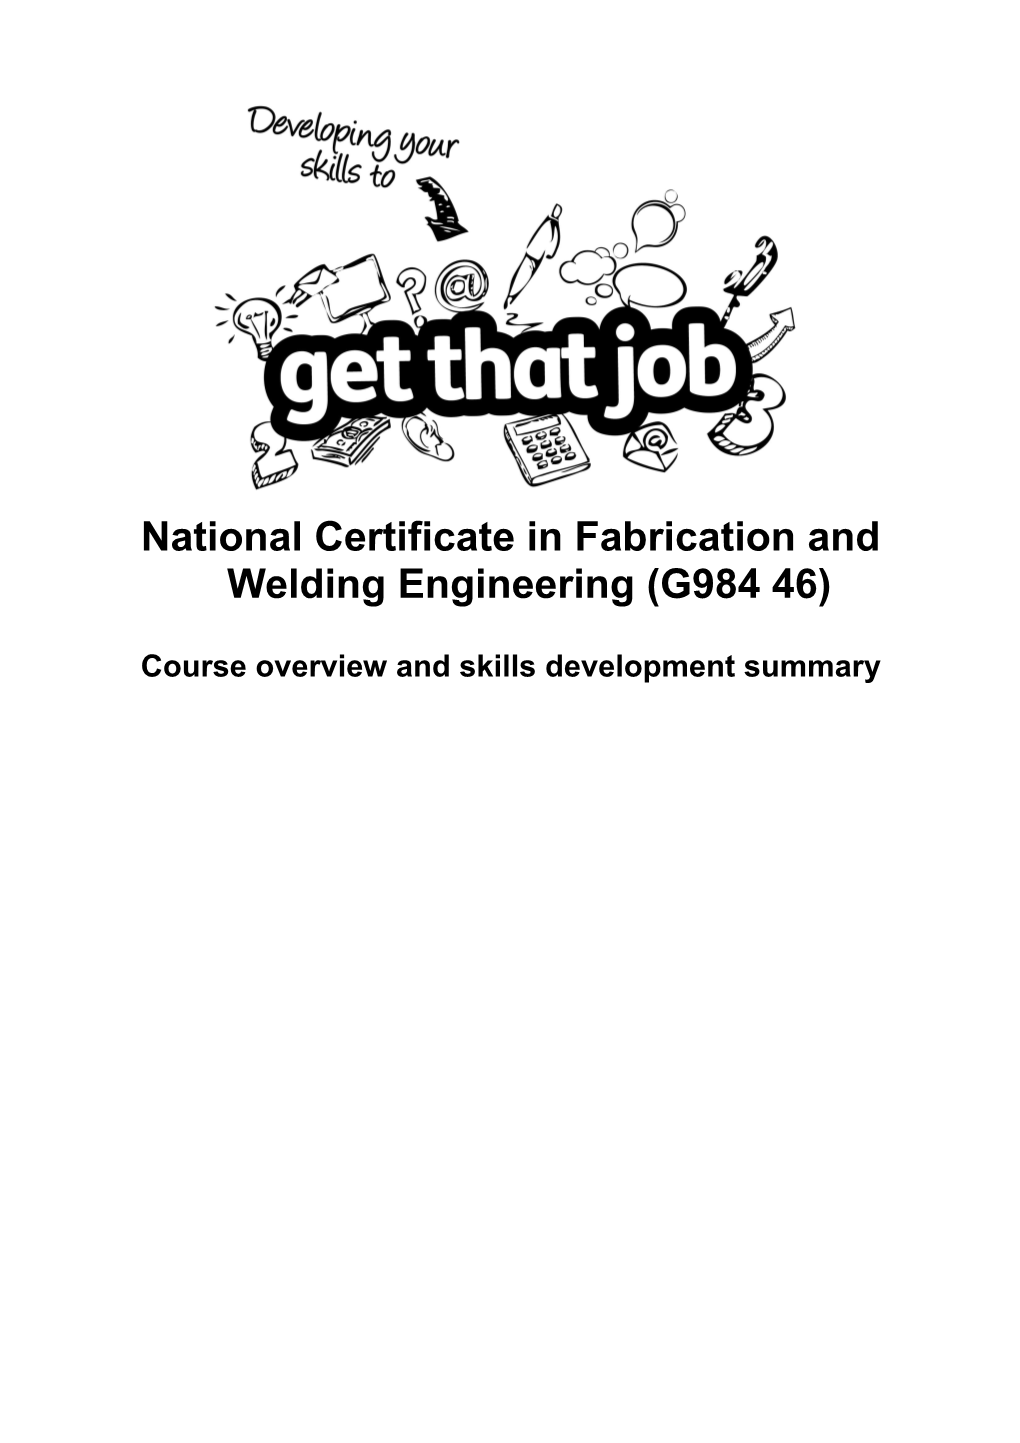 National Certificate in Fabrication and Welding Engineering (G984 46)